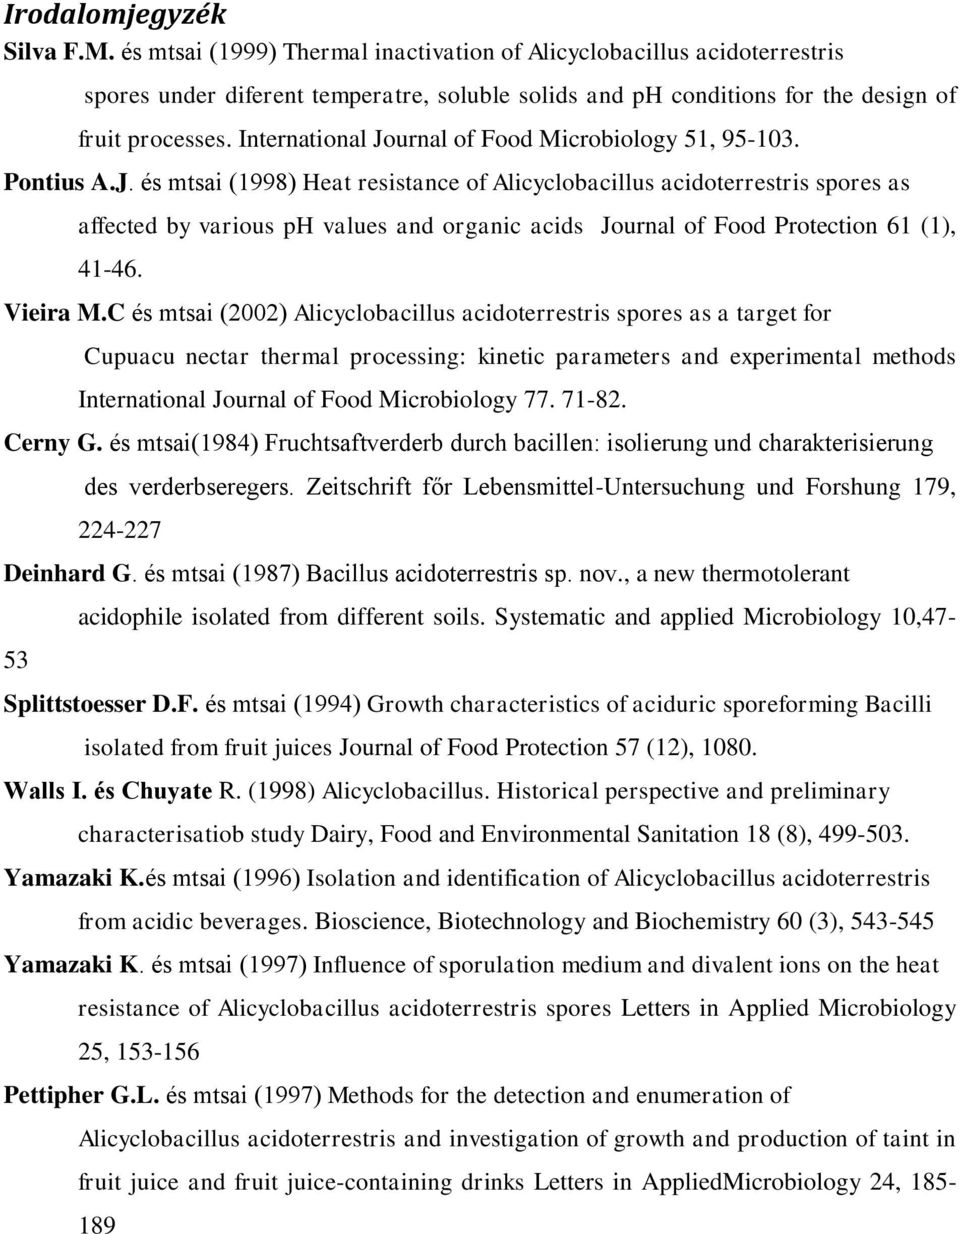 International Journal of Food Microbiology 51, 95-103. Pontius A.J. és mtsai (1998) Heat resistance of Alicyclobacillus acidoterrestris spores as affected by various ph values and organic acids Journal of Food Protection 61 (1), 41-46.